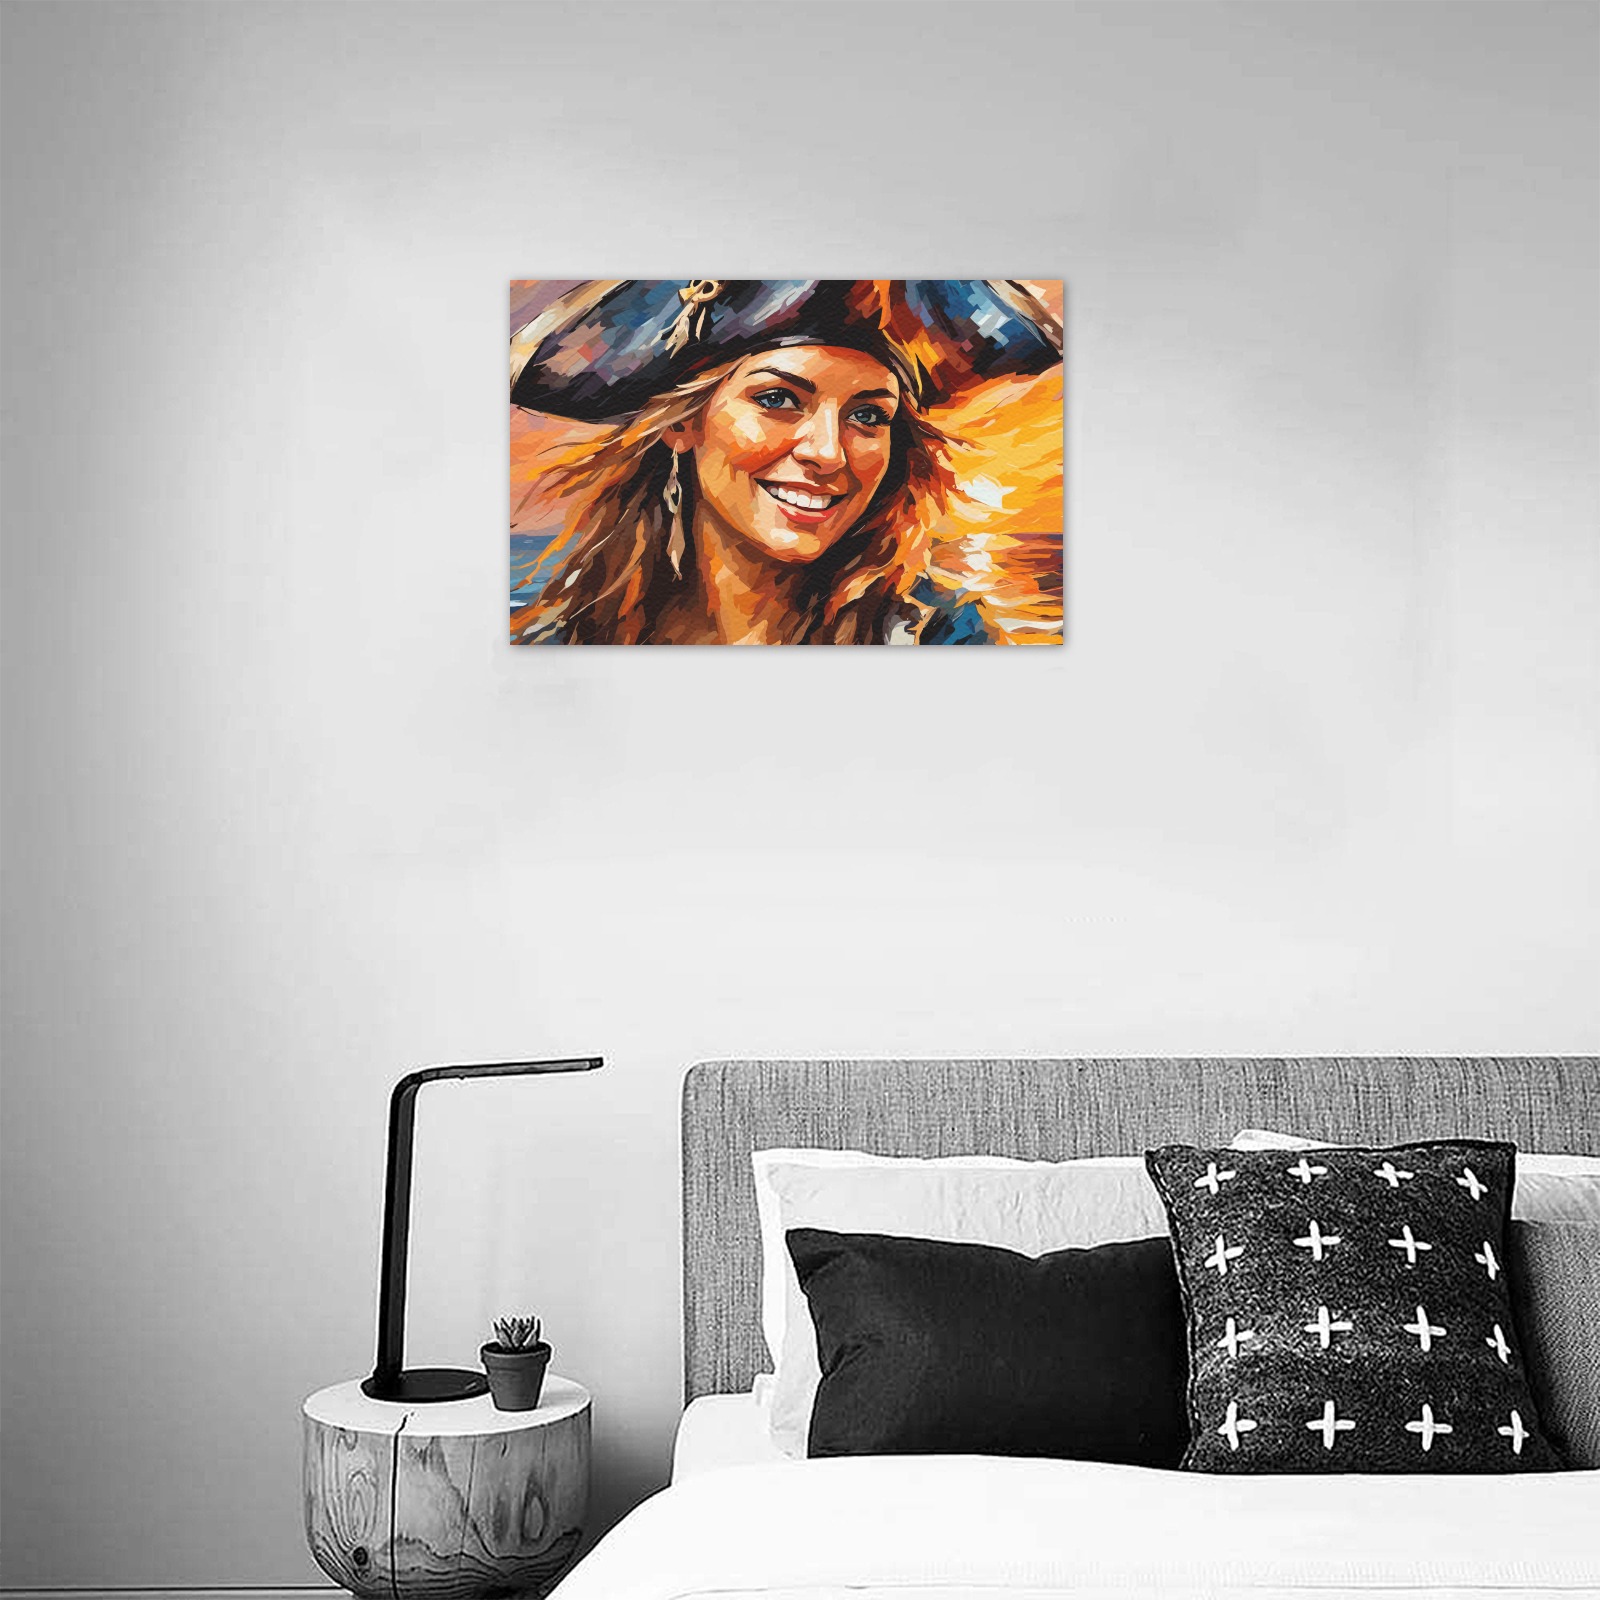 Striking smiling pirate lady at colorful sunset. Upgraded Canvas Print 18"x12"